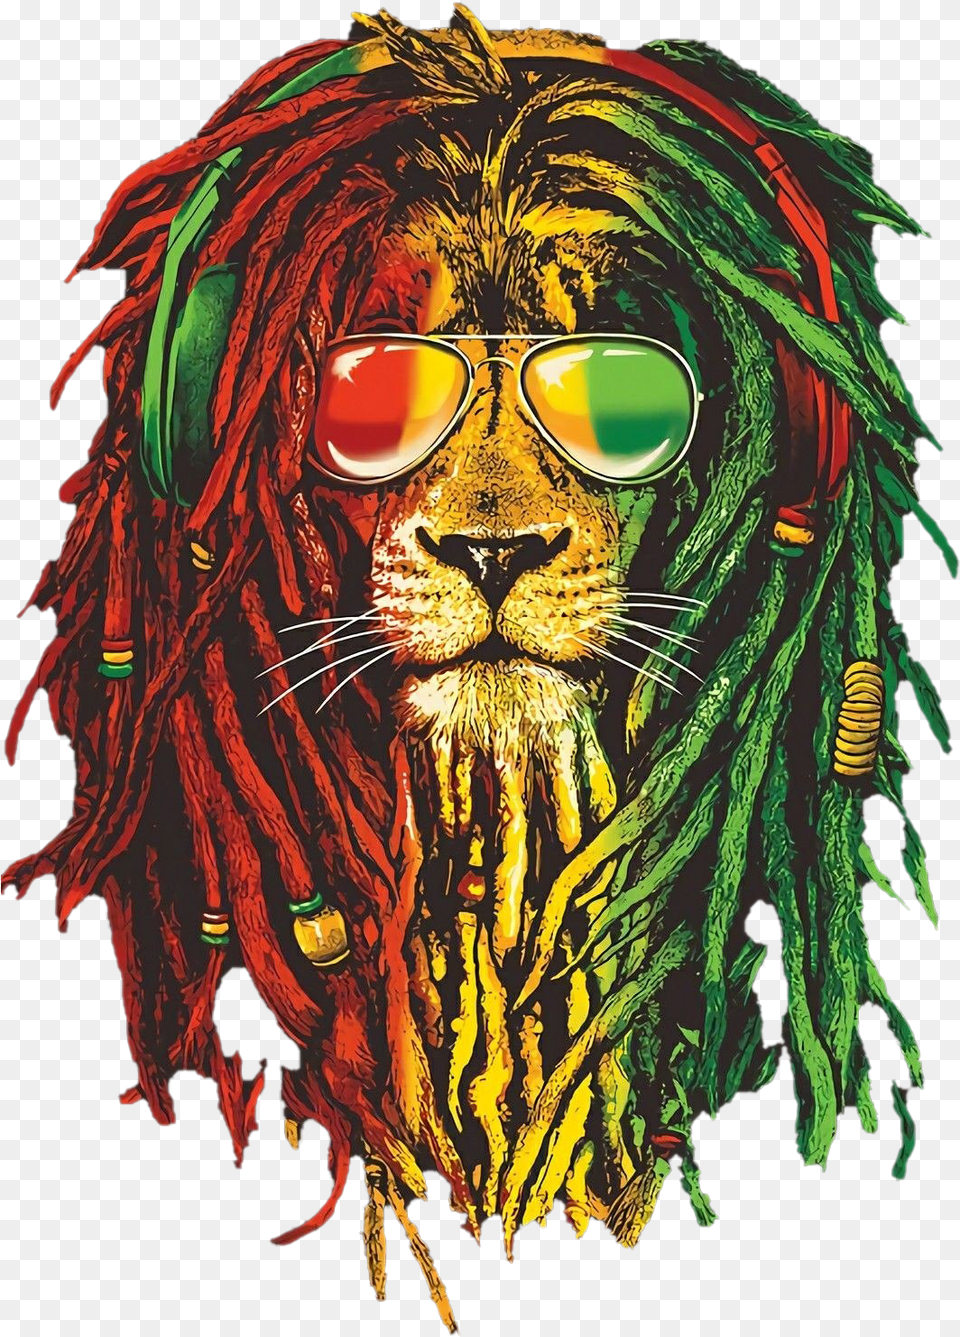 Rasta Lion Background Reggae Hd Wallpaper For Android, Accessories, Sunglasses, Art, Modern Art Png Image